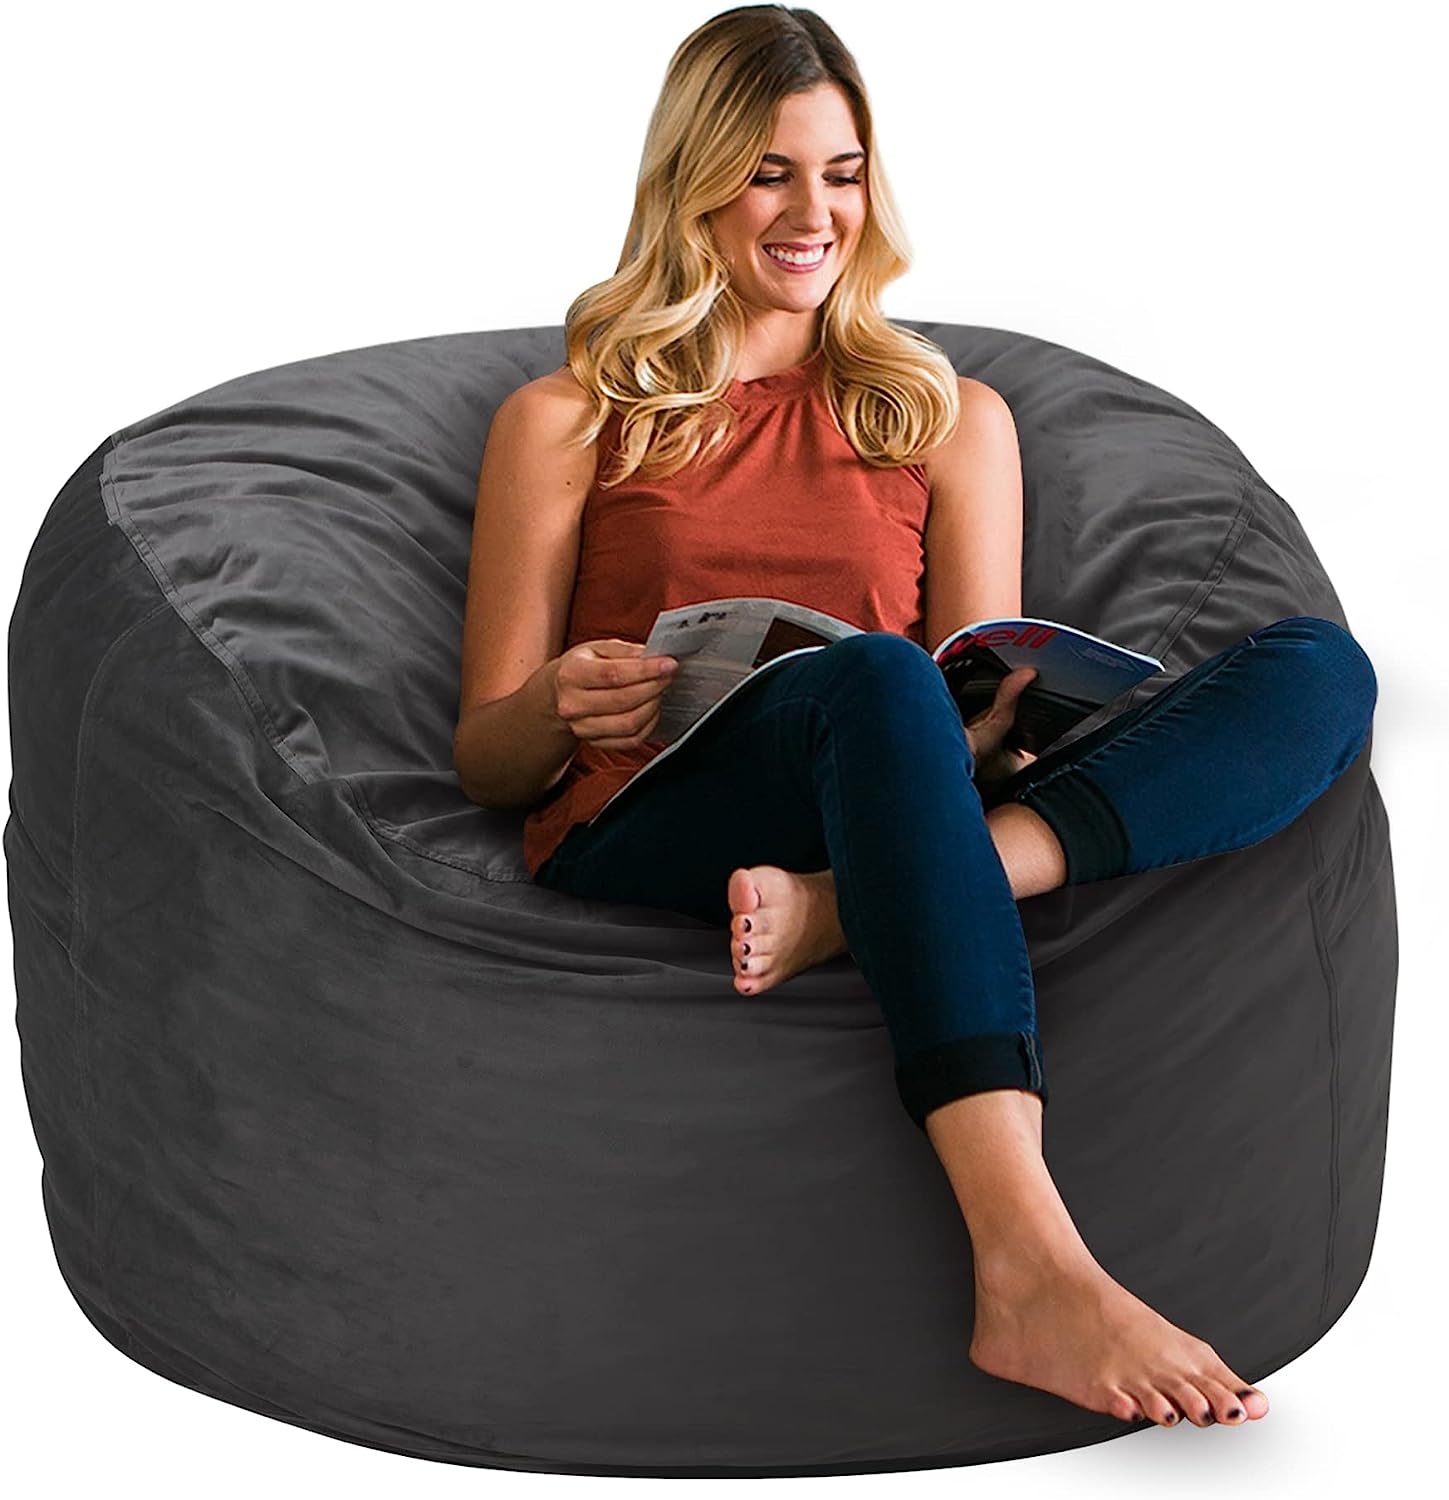 How do I select the size of a bean bag How much beans are really needed  for XXXL  XXL  and XL bean bags  by Urbanloom  Medium